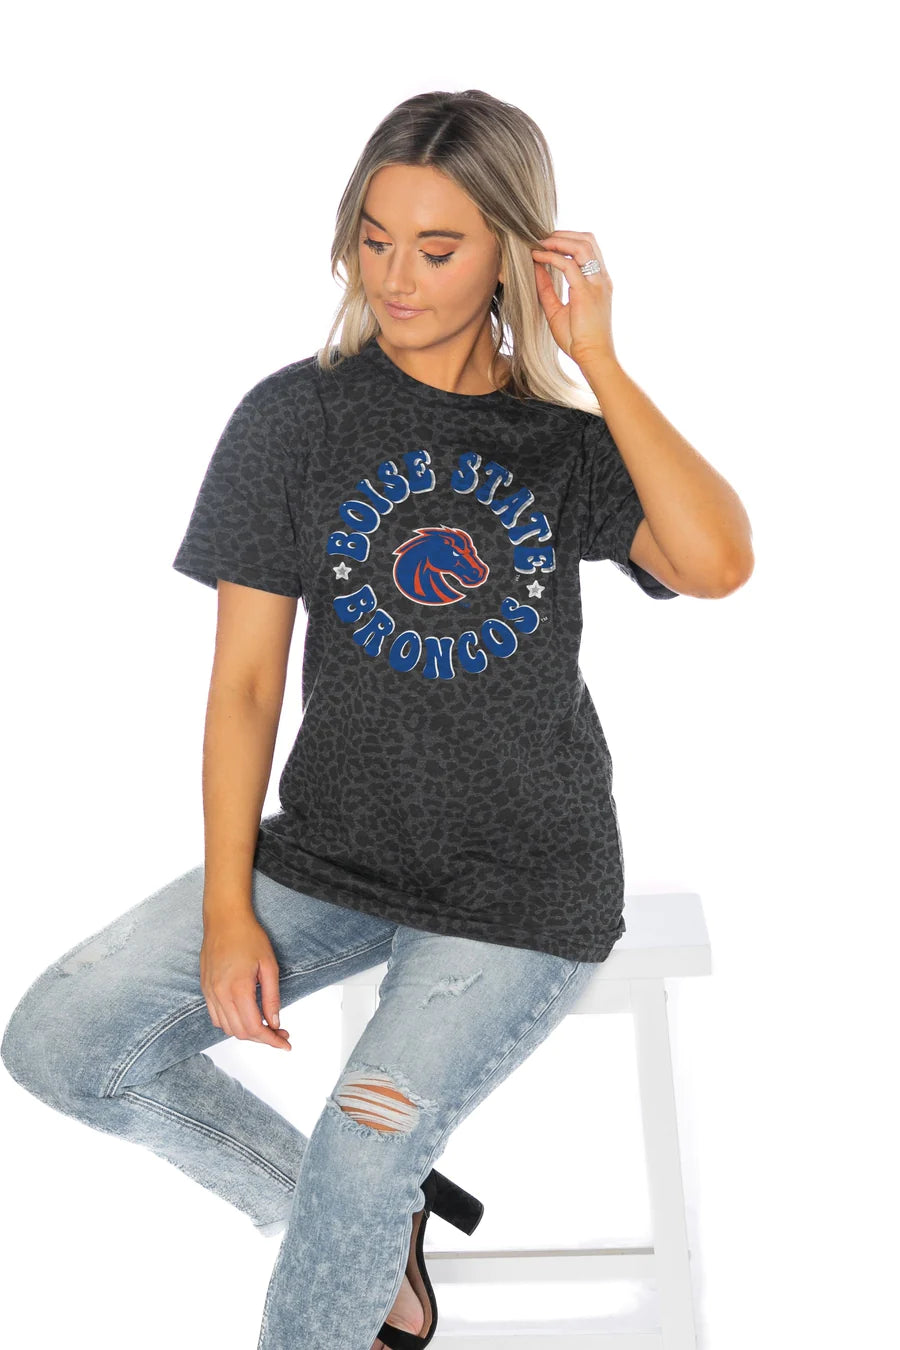 Boise State Broncos Gameday Couture Women's Leopard Print T-Shirt (Charcoal/Black)